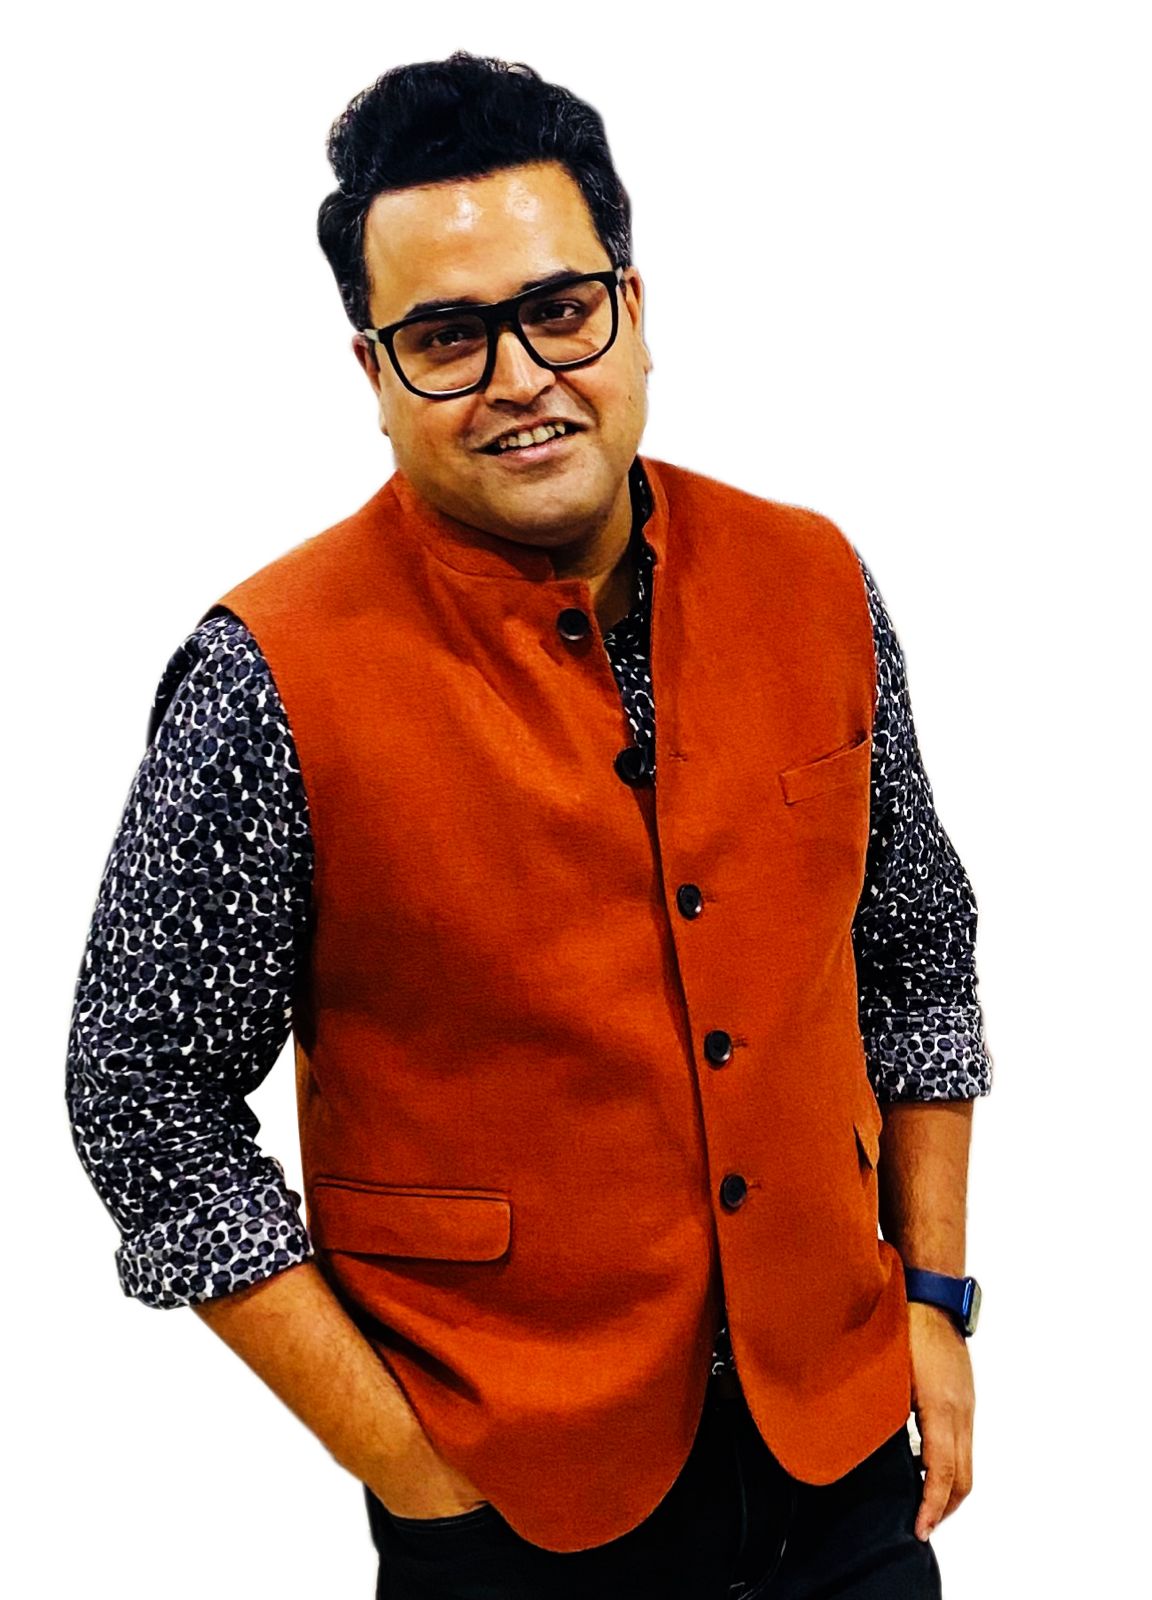 Dushyant Sinha, Founder of ICCPL, the Leading PR firm In India, amongst the top 8 Emerging Indian Personalities